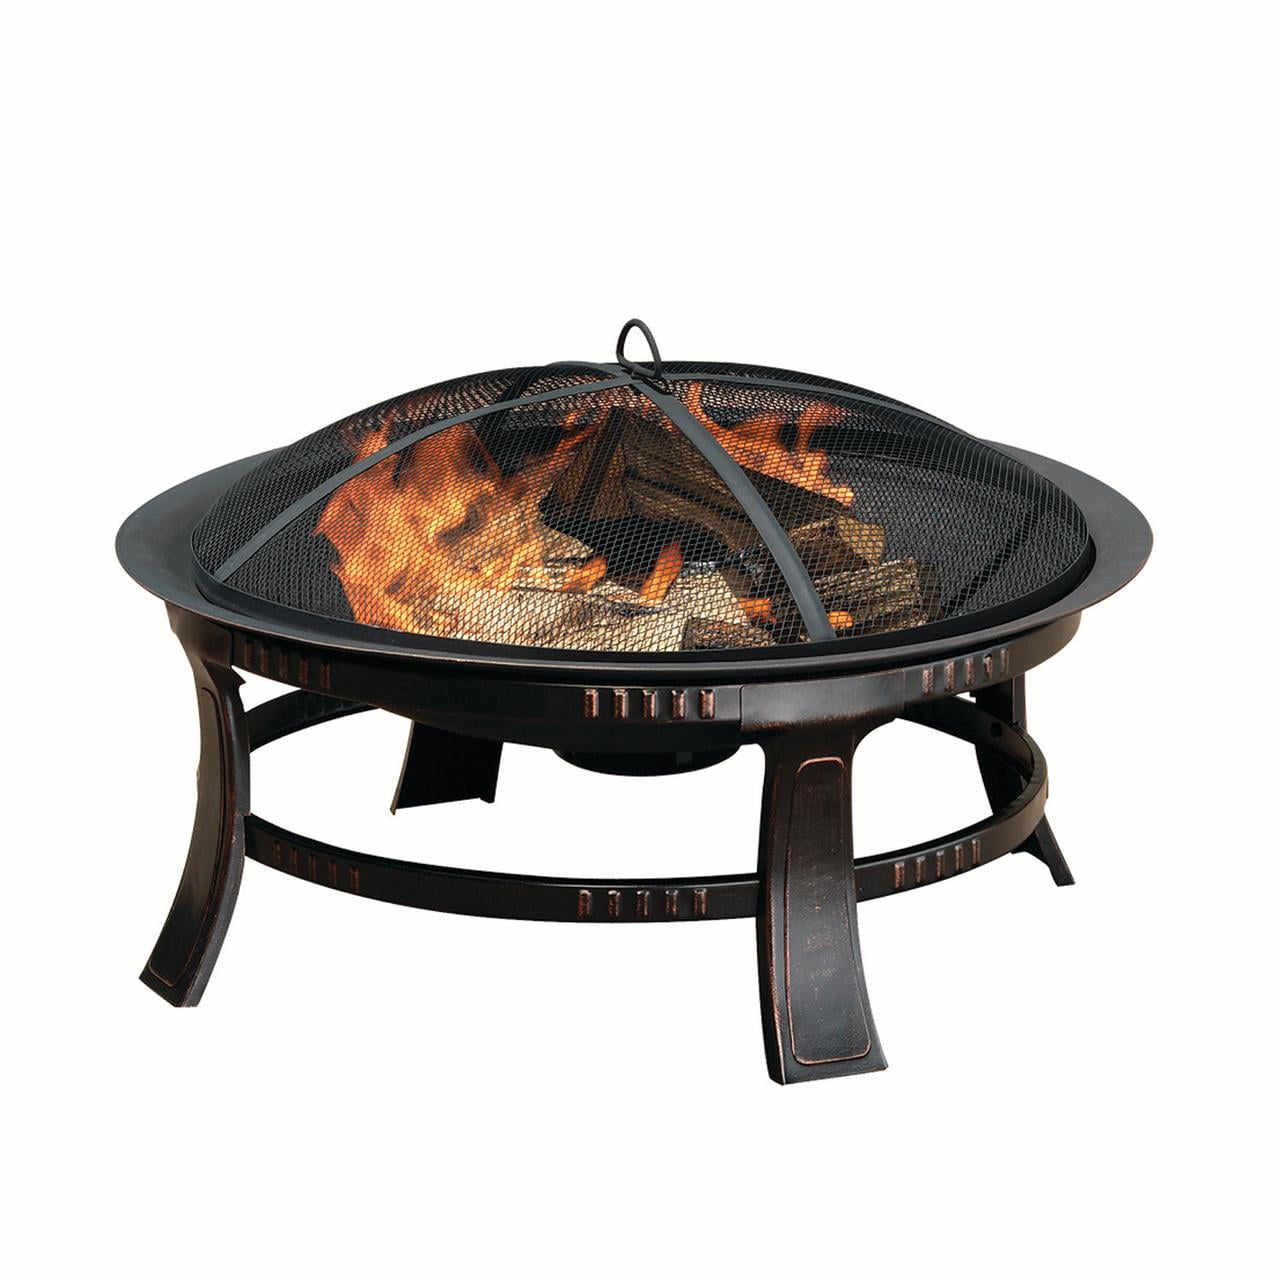 Brant Outdoor Wood Fire Pit, Pleasant Hearth Bradford Fire Pit